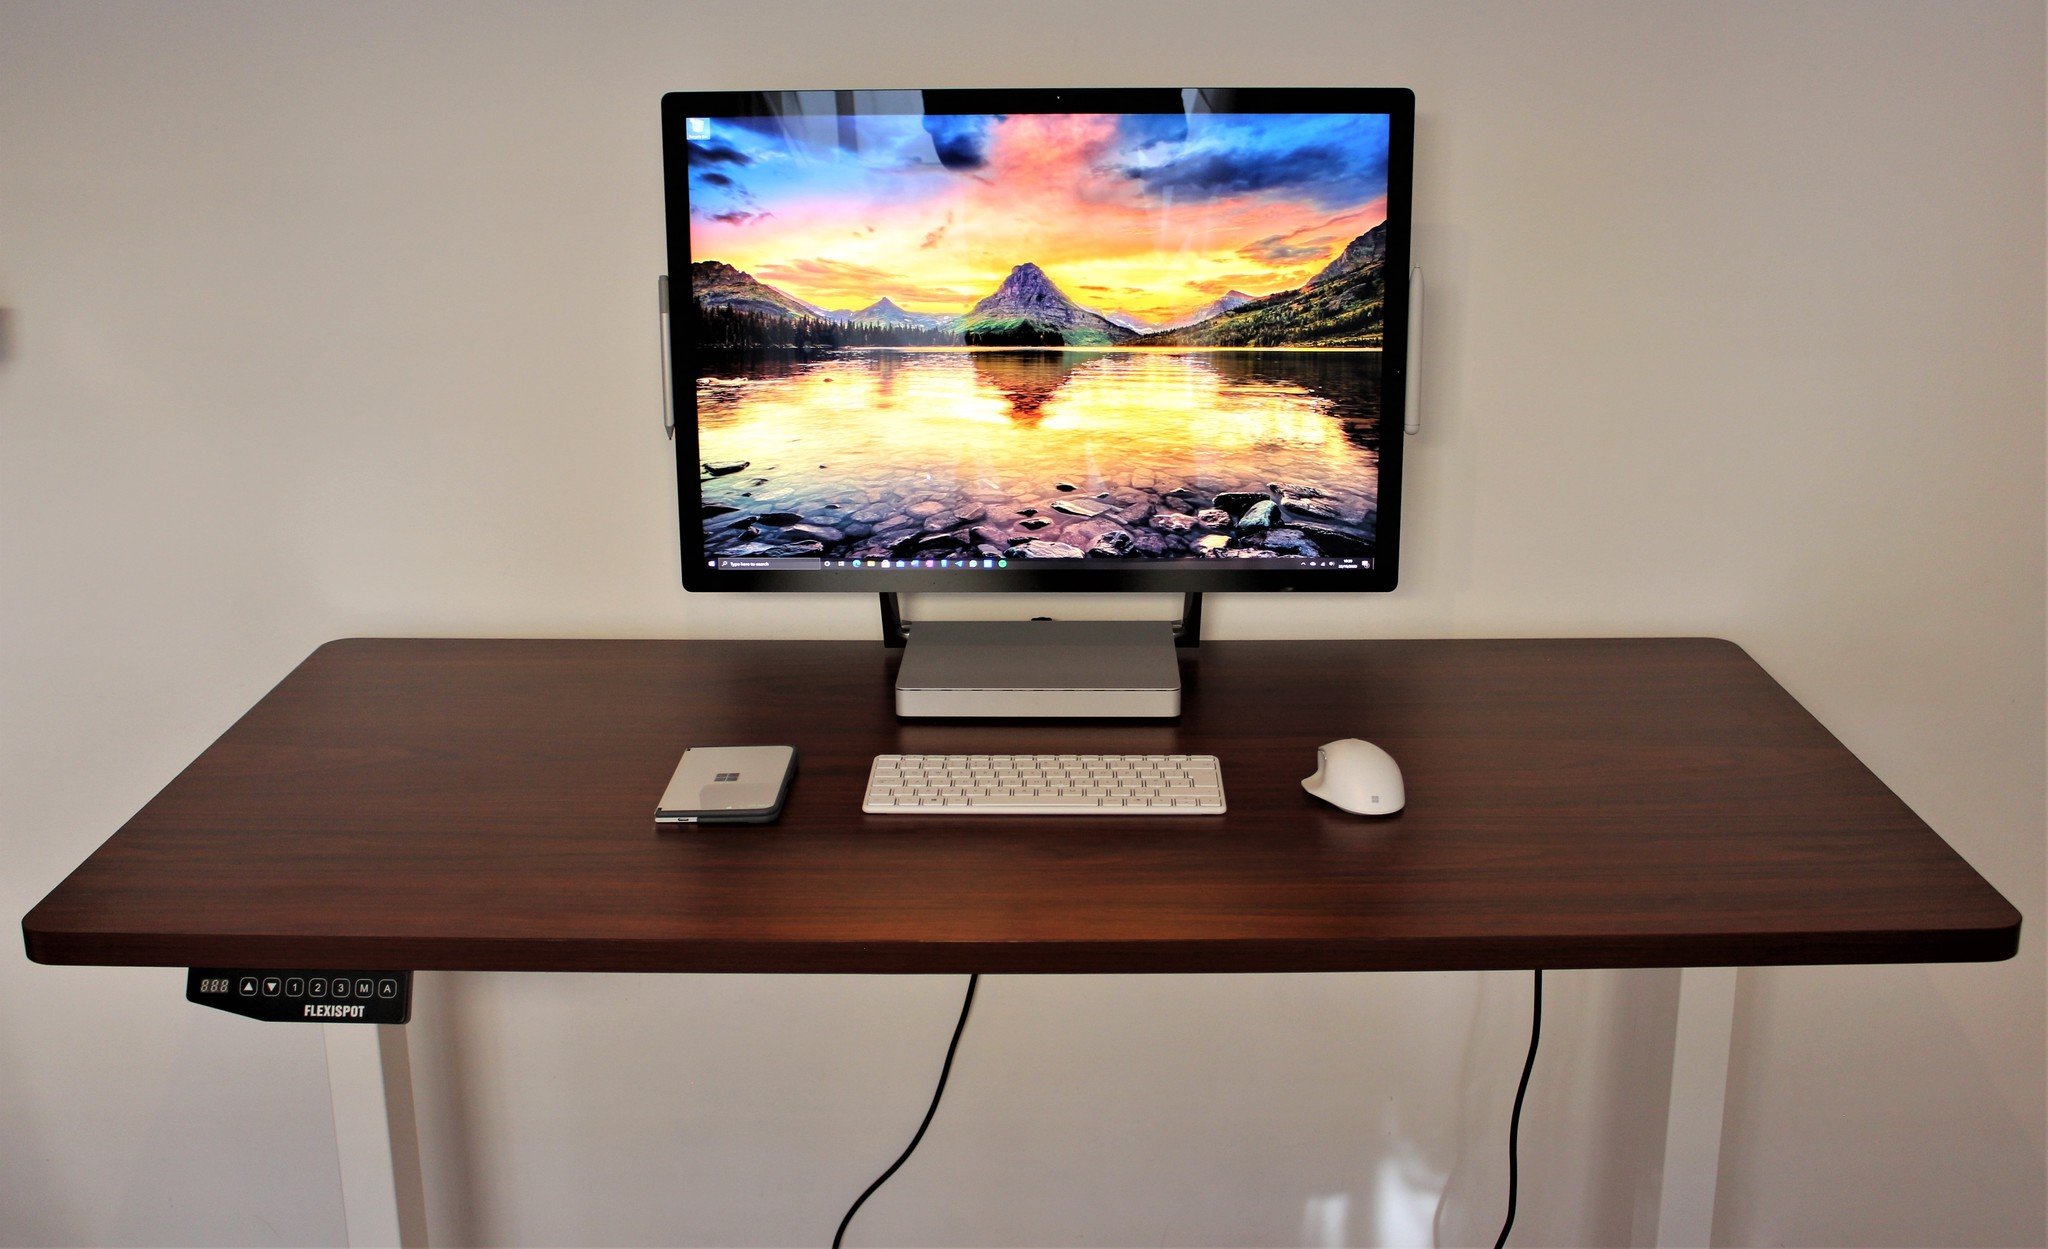 FlexiSpot E5 standing desk review: A great choice for working at home |  Windows Central